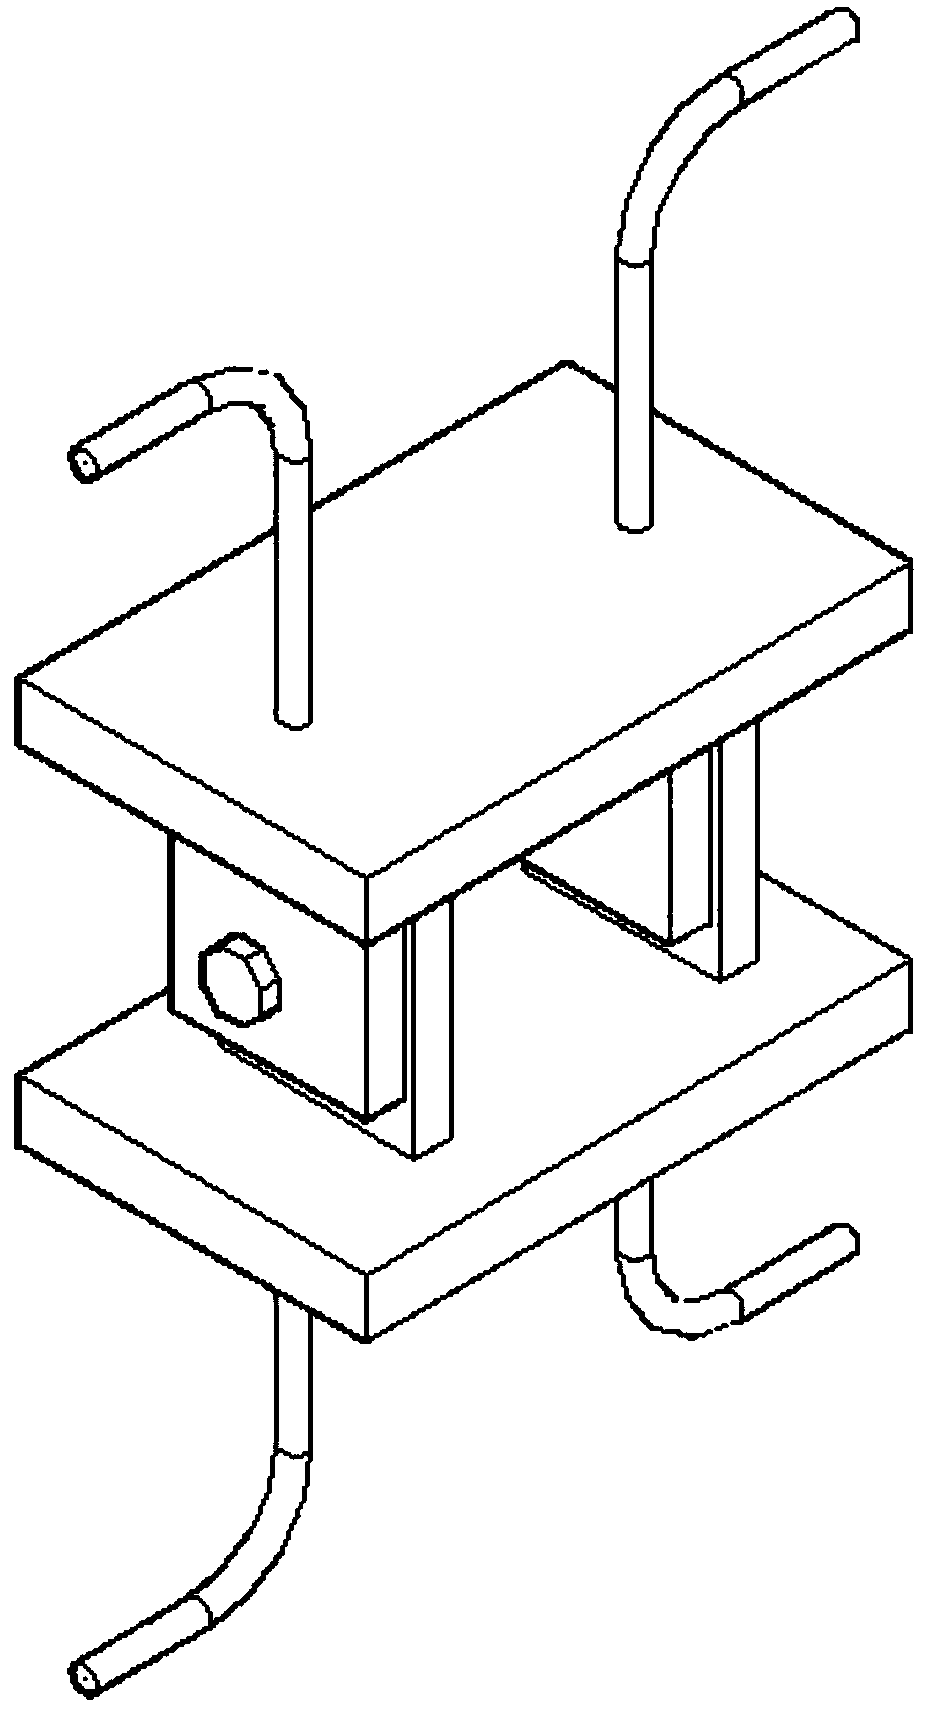 Installation connector for prefabricated building precast wall